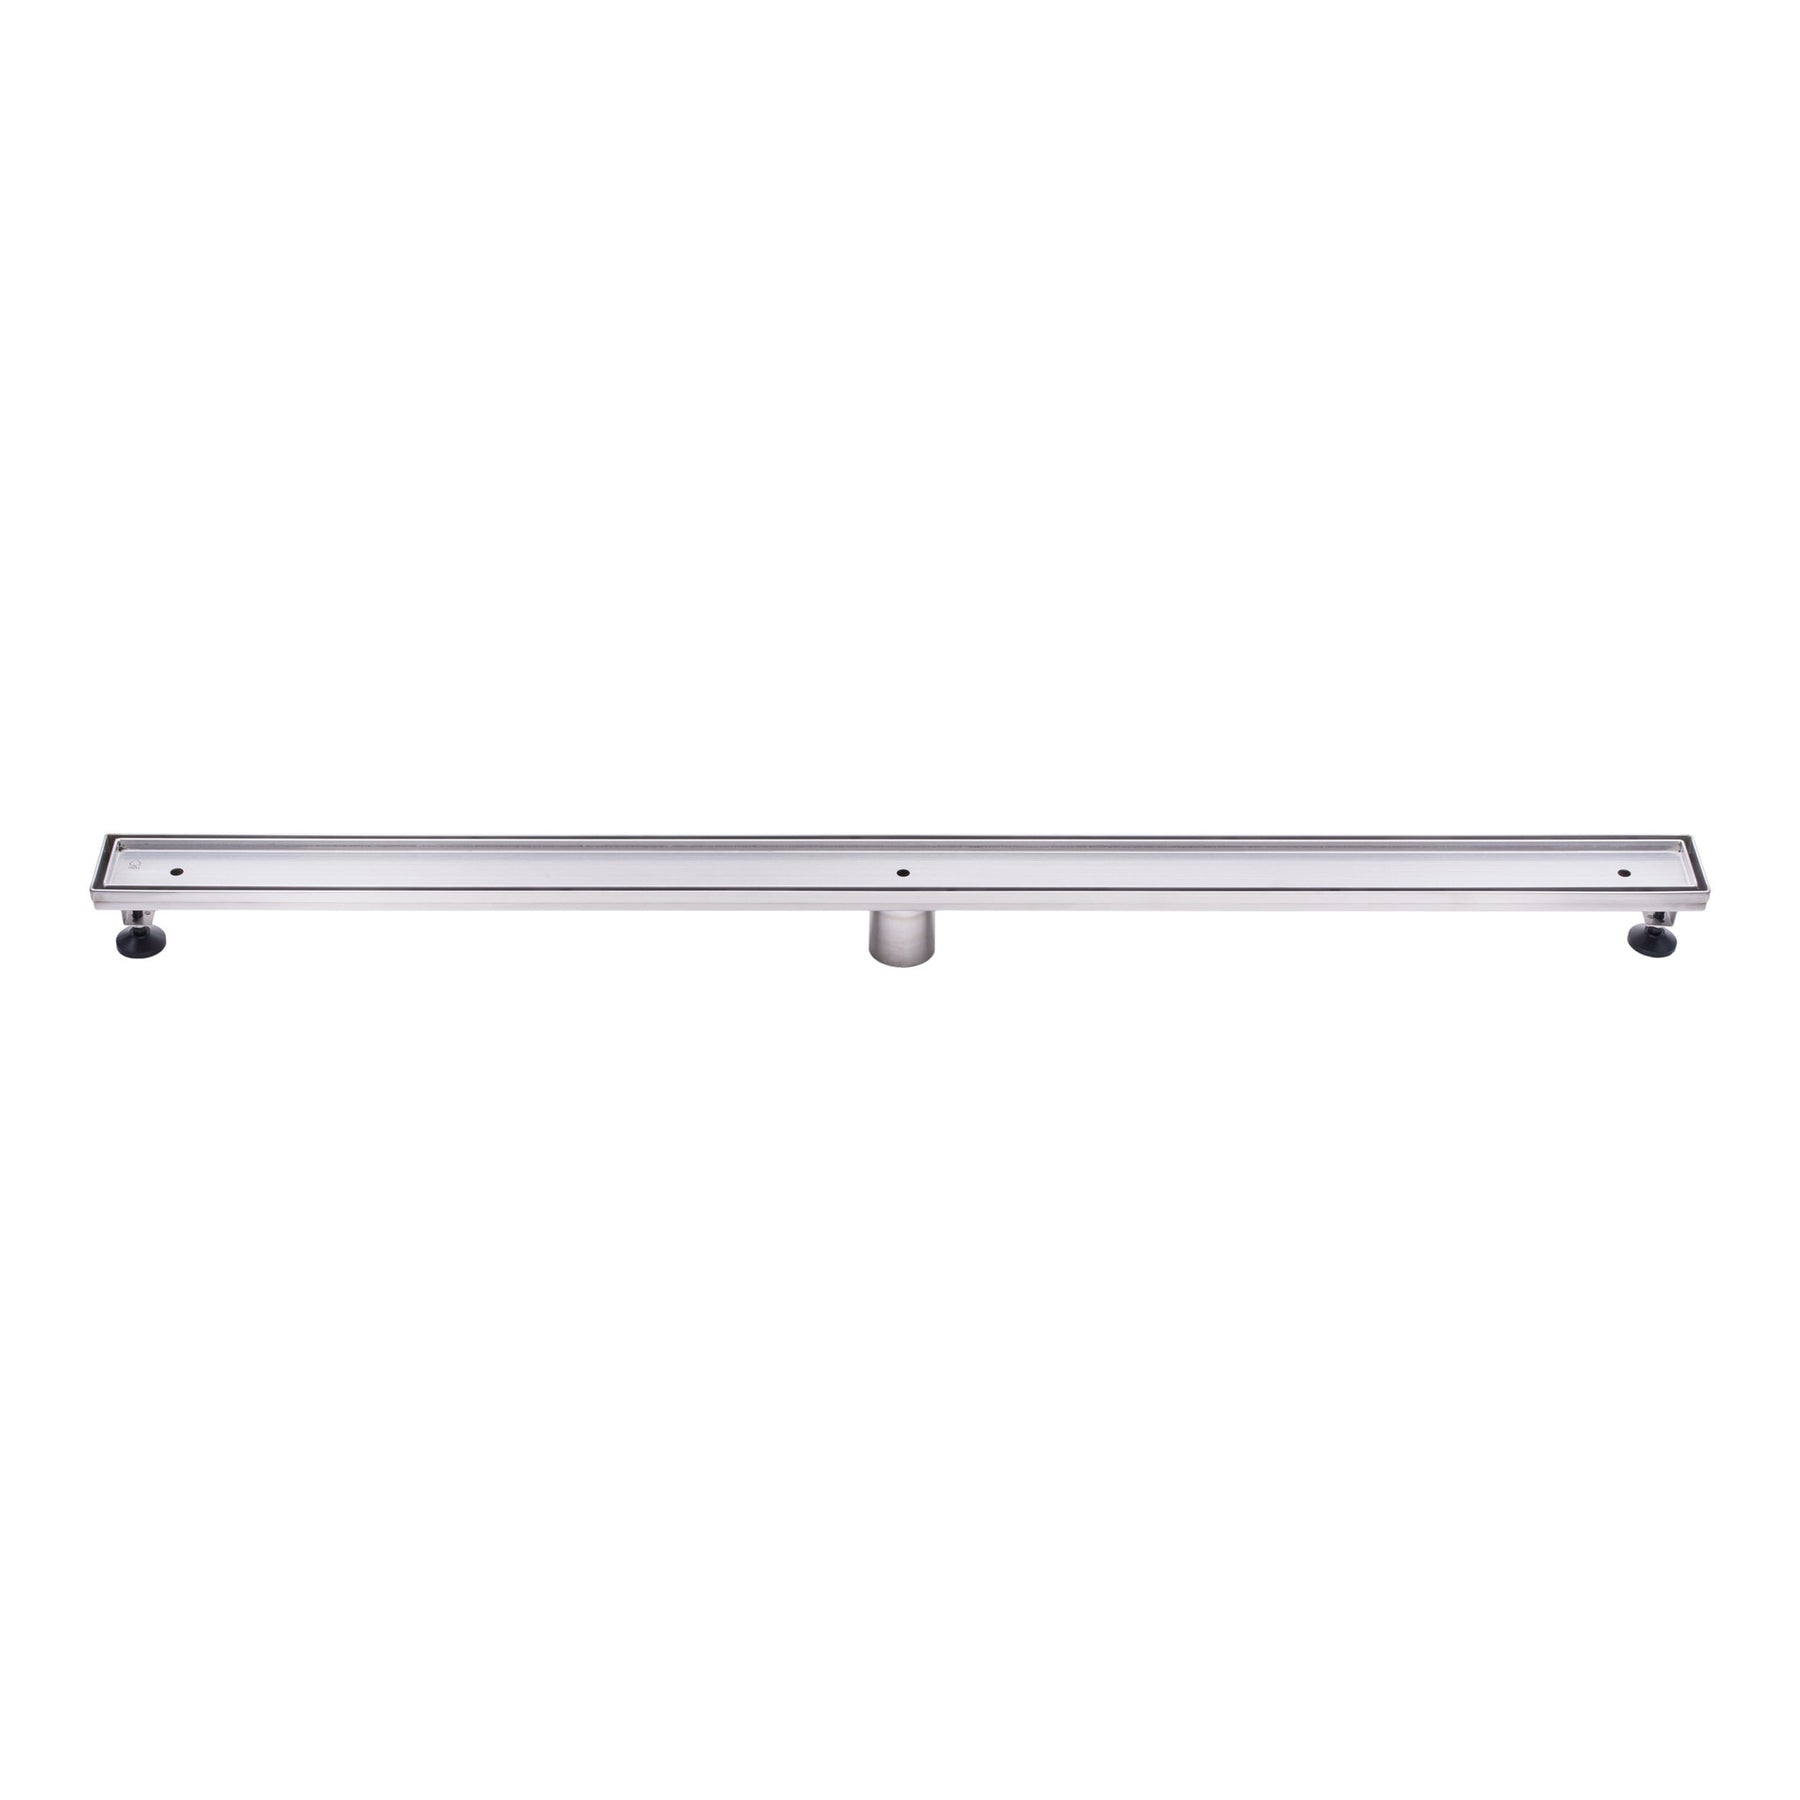 Bai 0576 Stainless Steel 60-Inch Linear Shower Drain